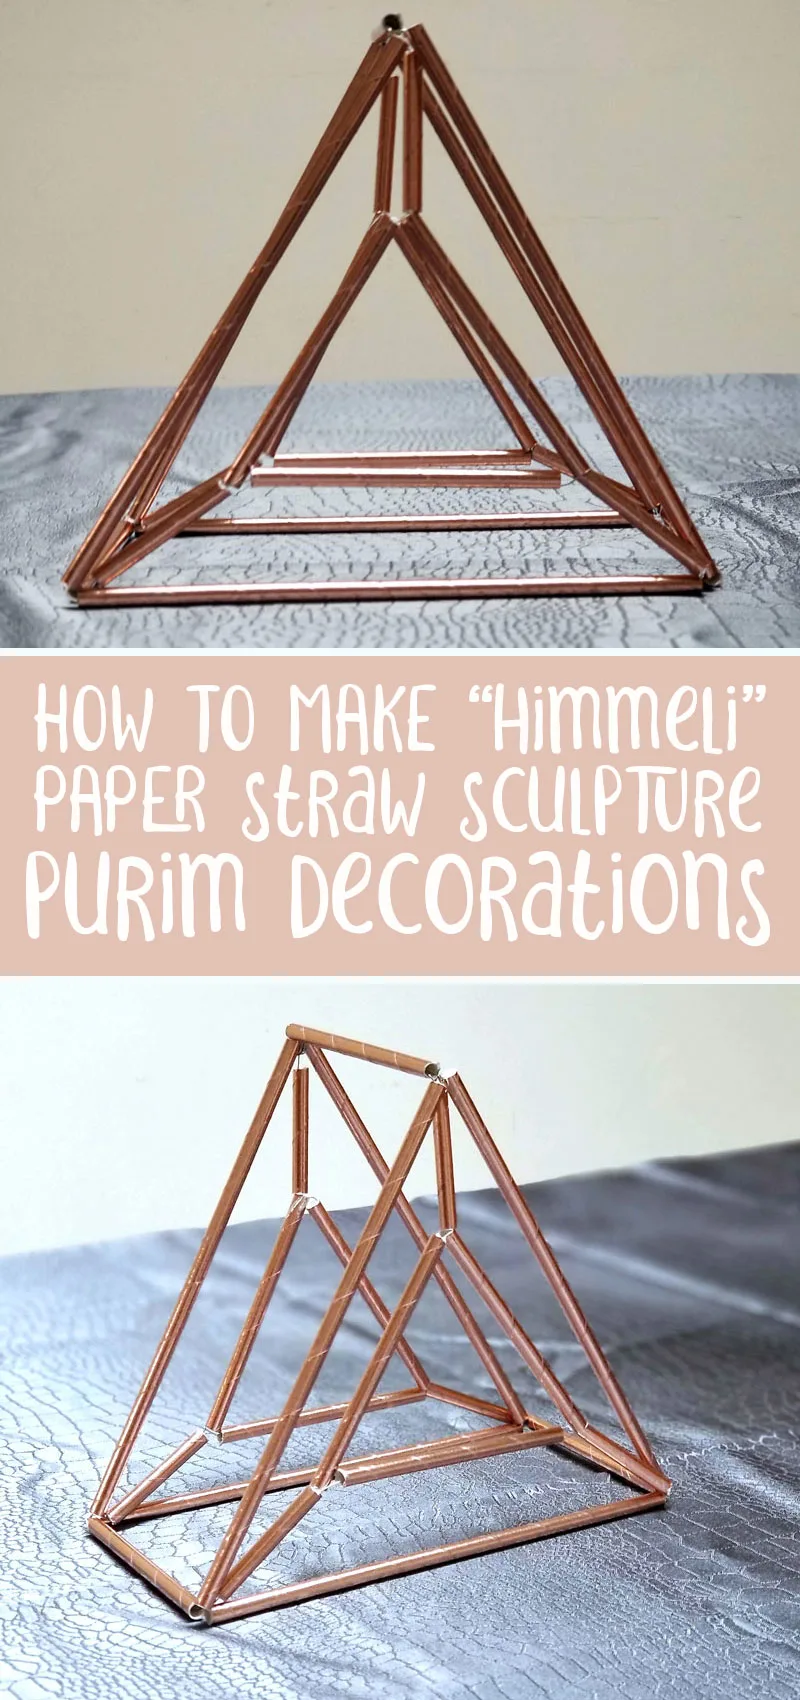 Looking for a cool Purim craft for adults? These himmeli hamantaschen crafts made from paper straws are way cool and are presented in a gorgeous Purim tablescape.